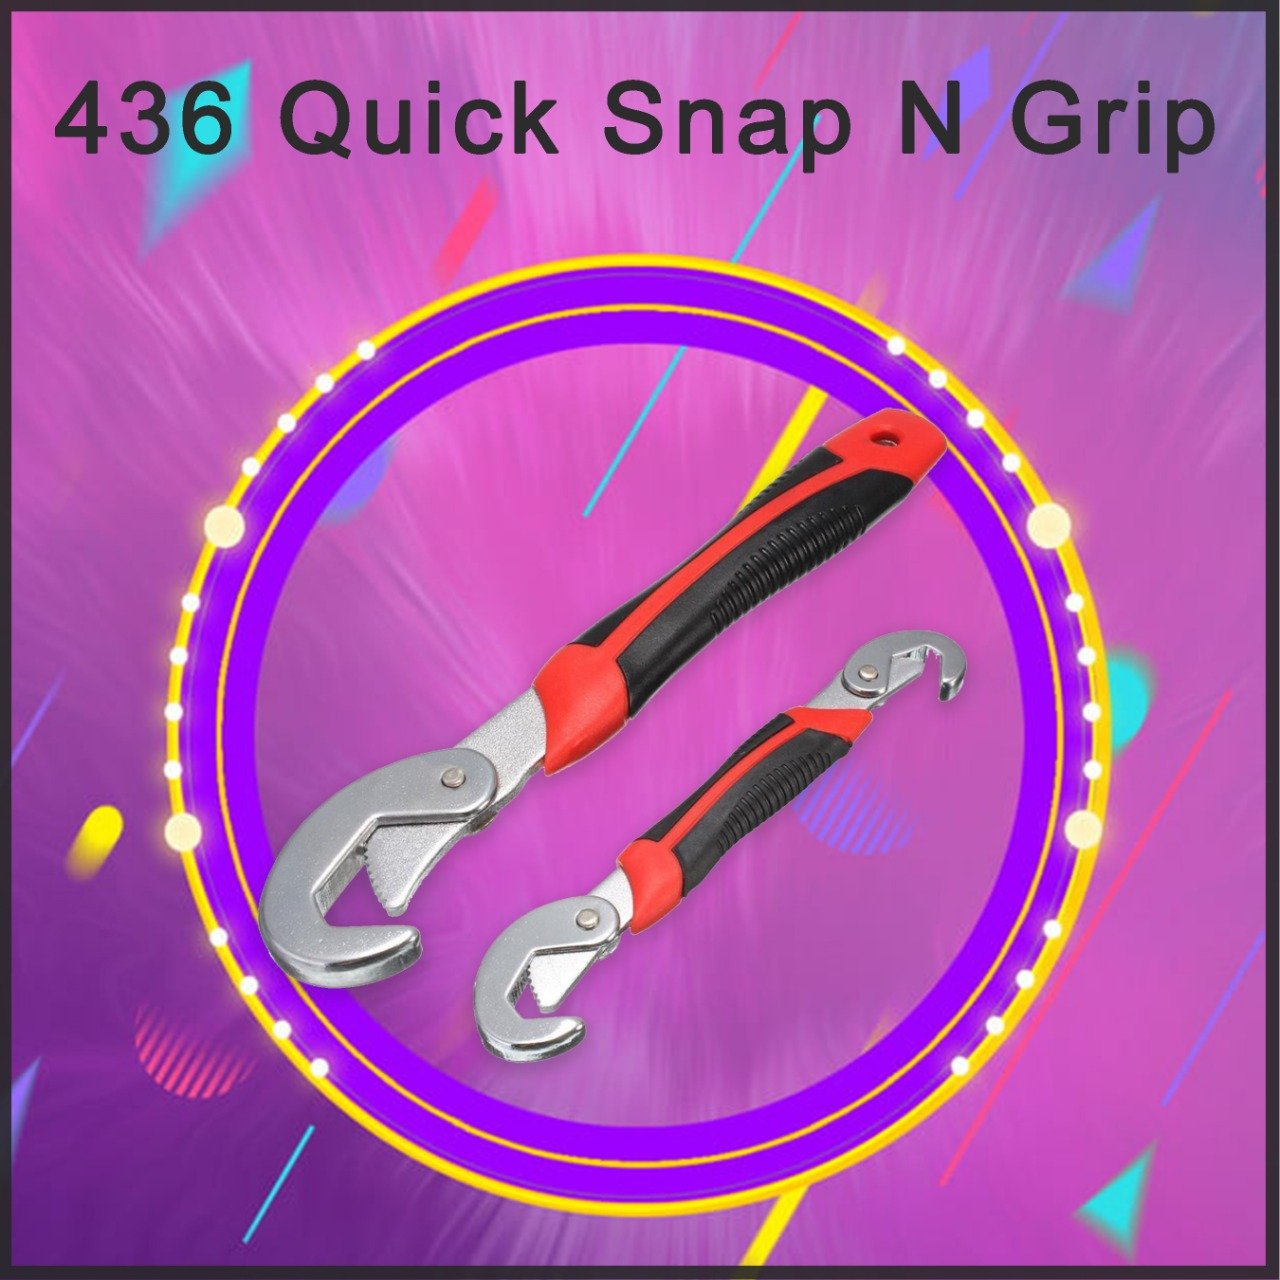 0436 Quick Snap N Grip - SkyShopy